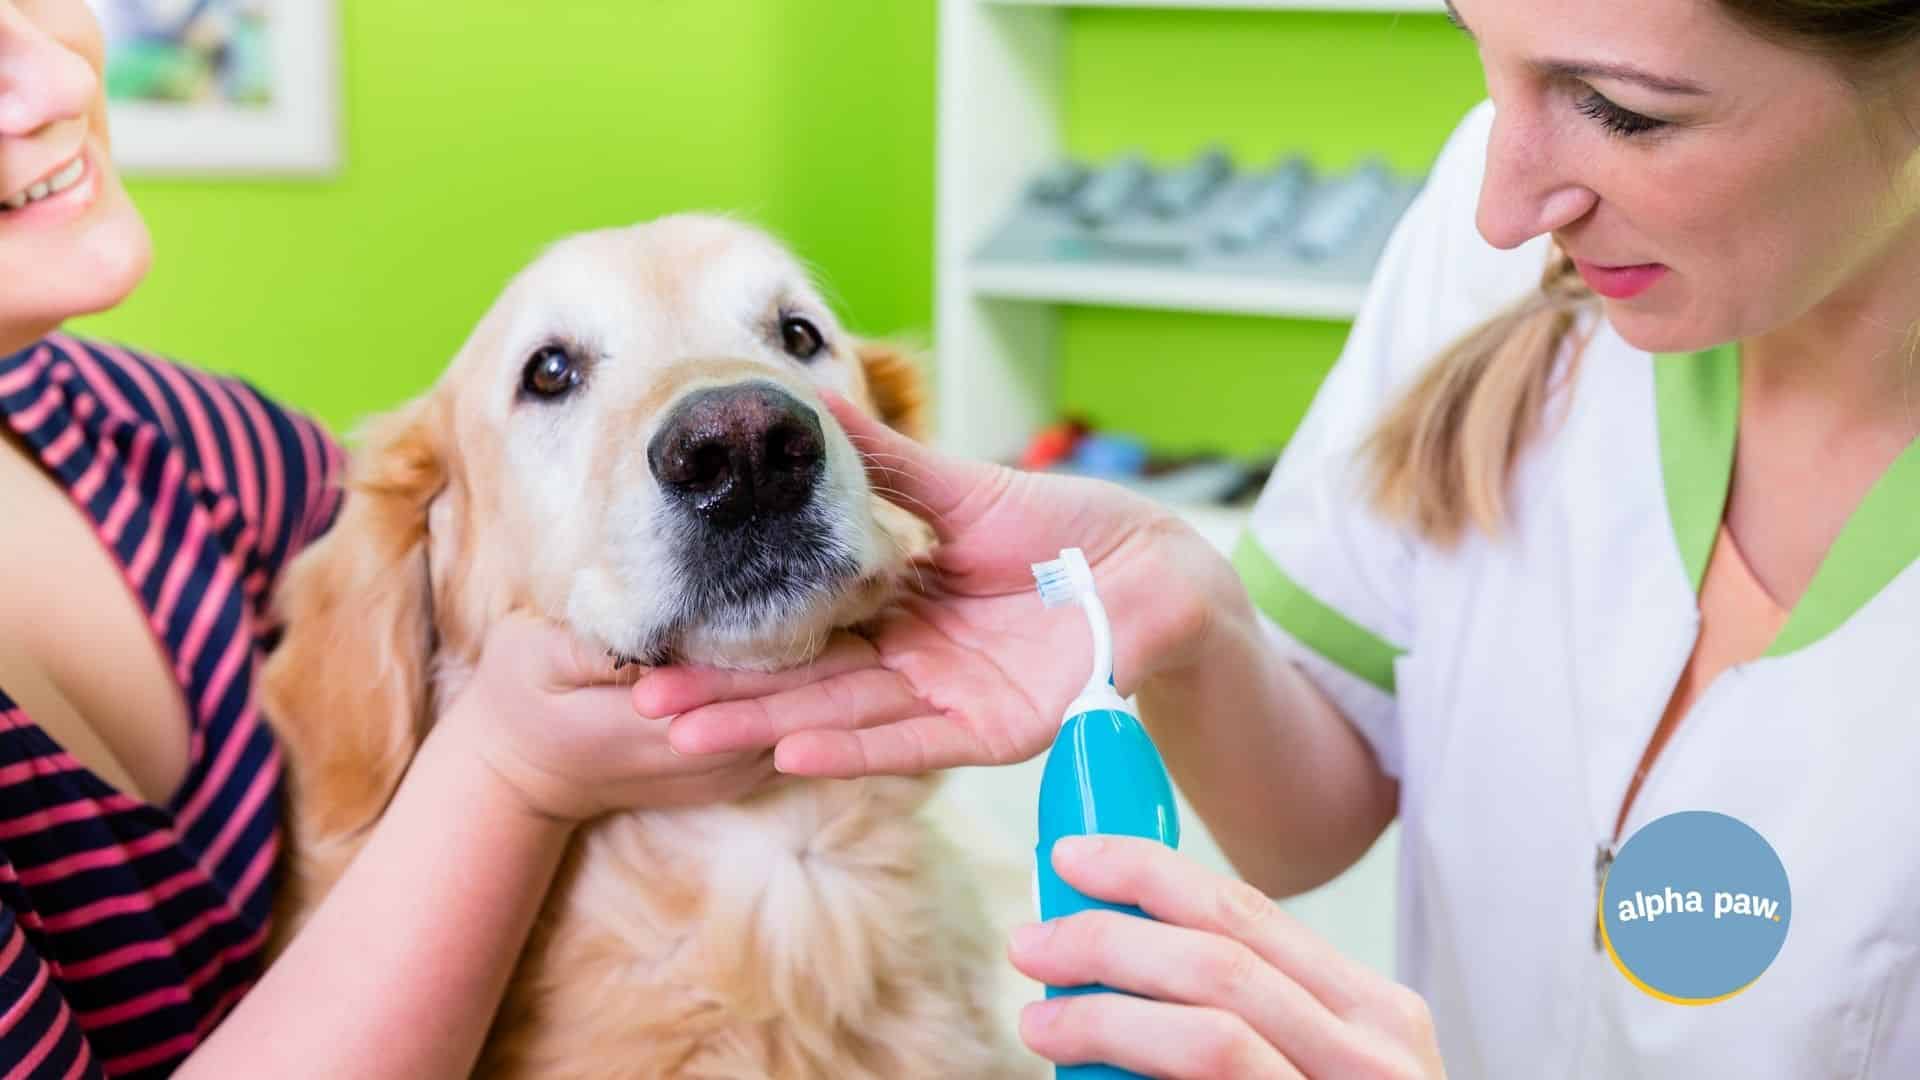 Dog Dental Care: How To Keep Your Dog’s Teeth Clean